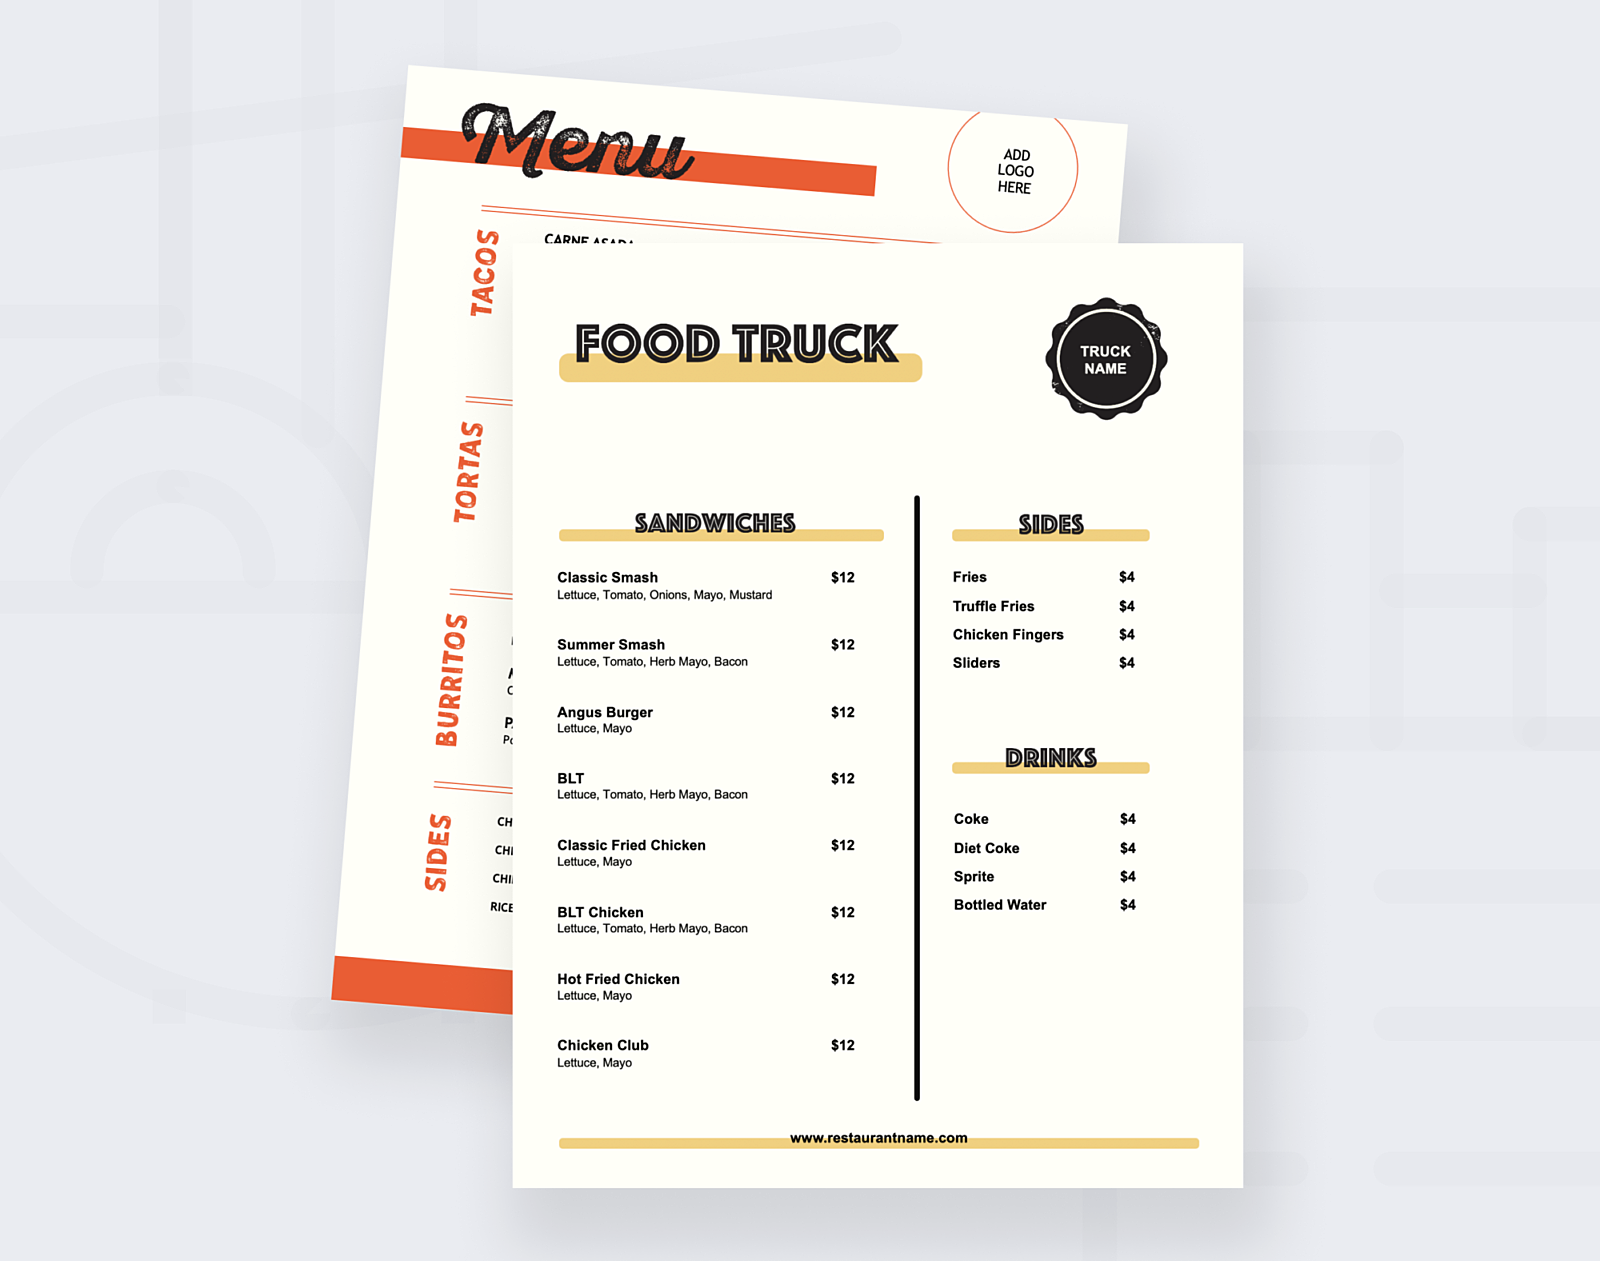 Whats Inside foodtruck